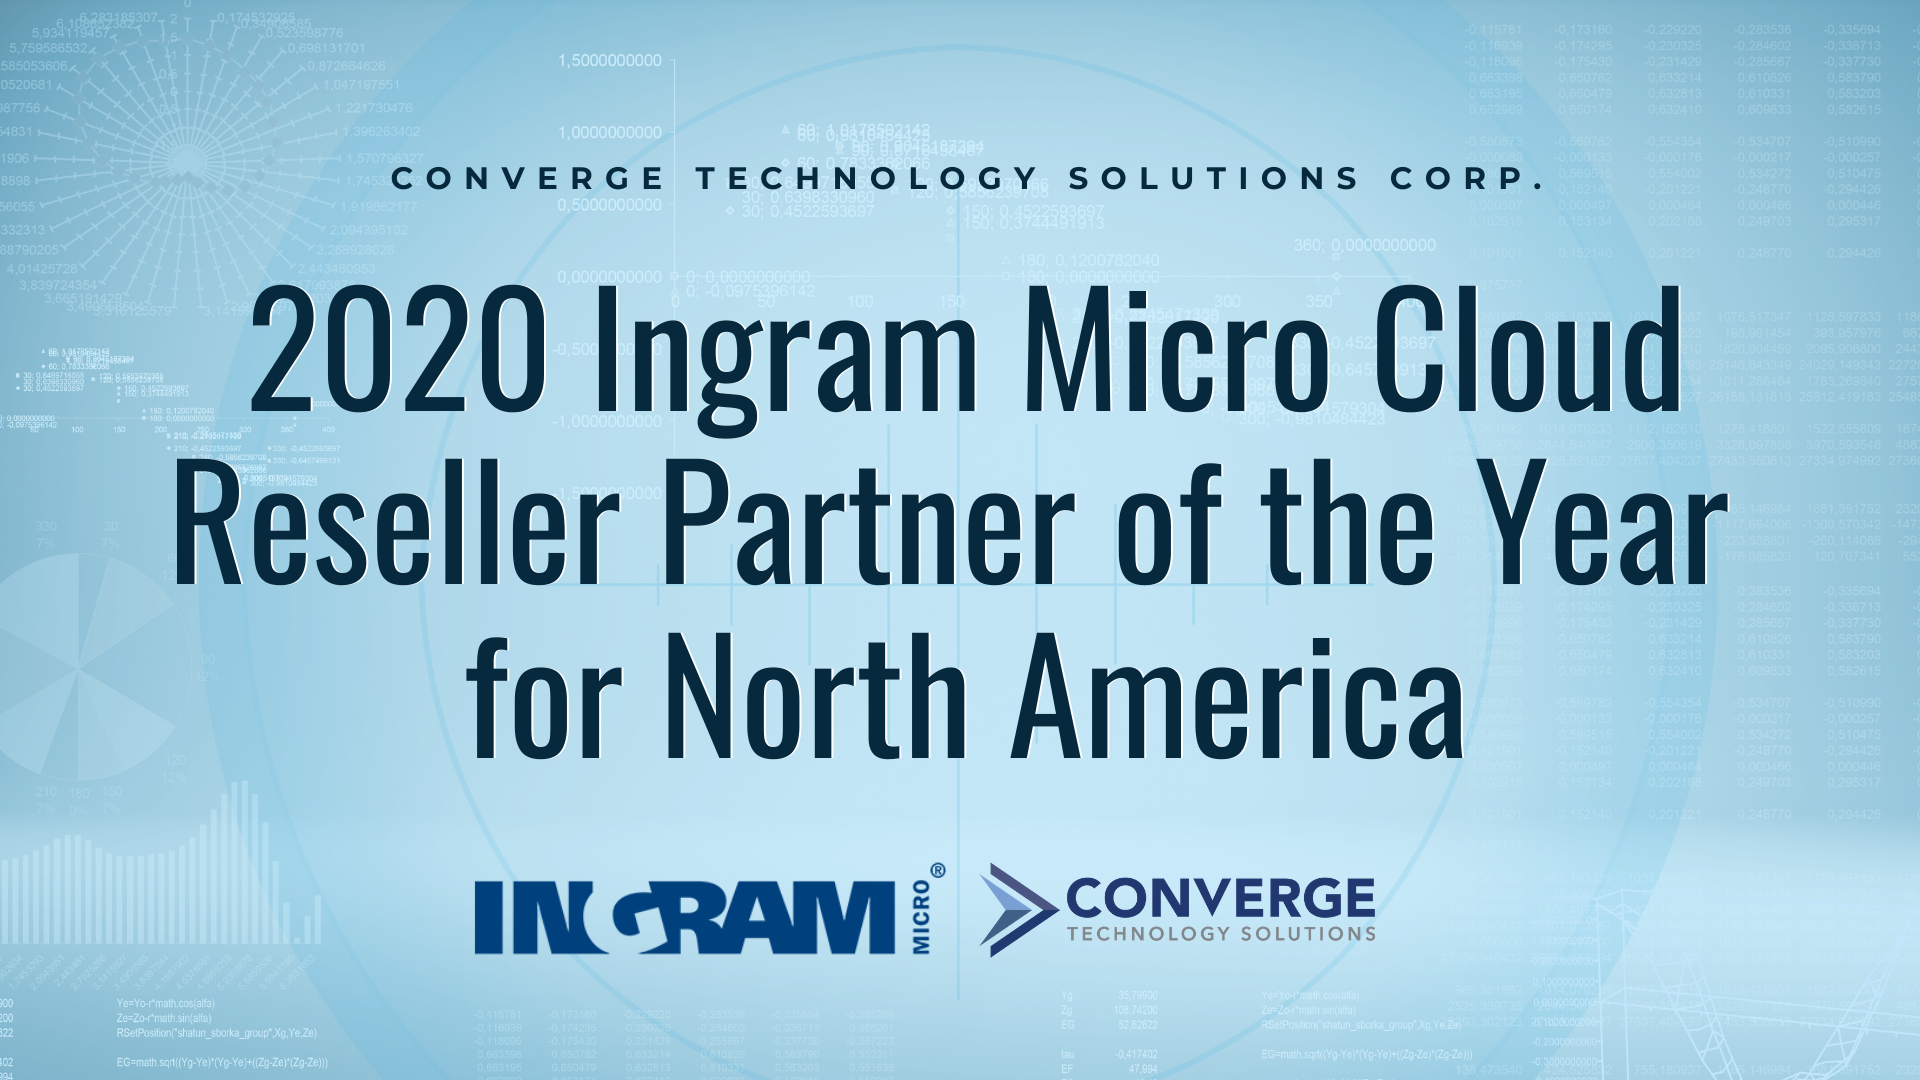 Converge Wins 2020 Ingram Micro Cloud Reseller Partner of the year for North America